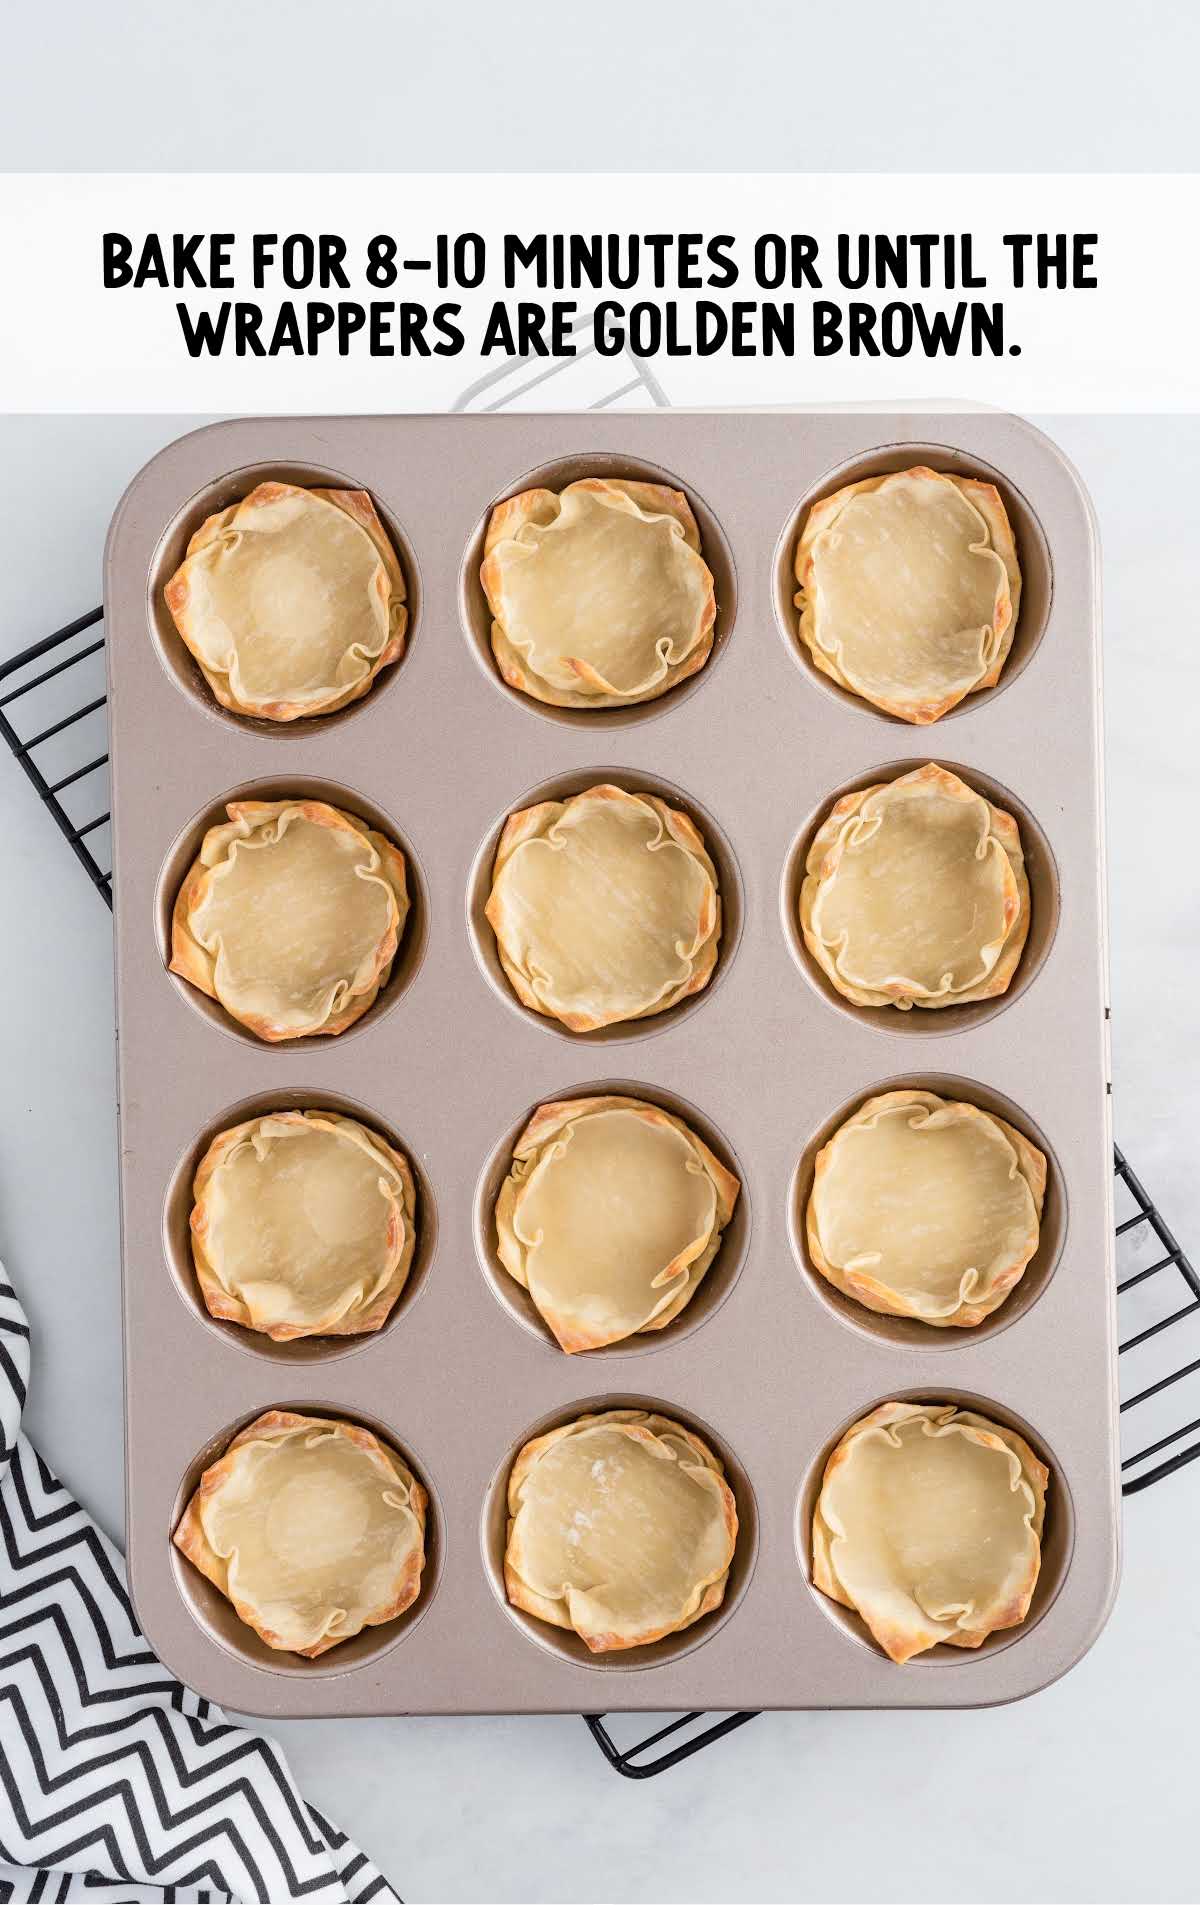 bake the wonton cups until the wrappers are golden brown